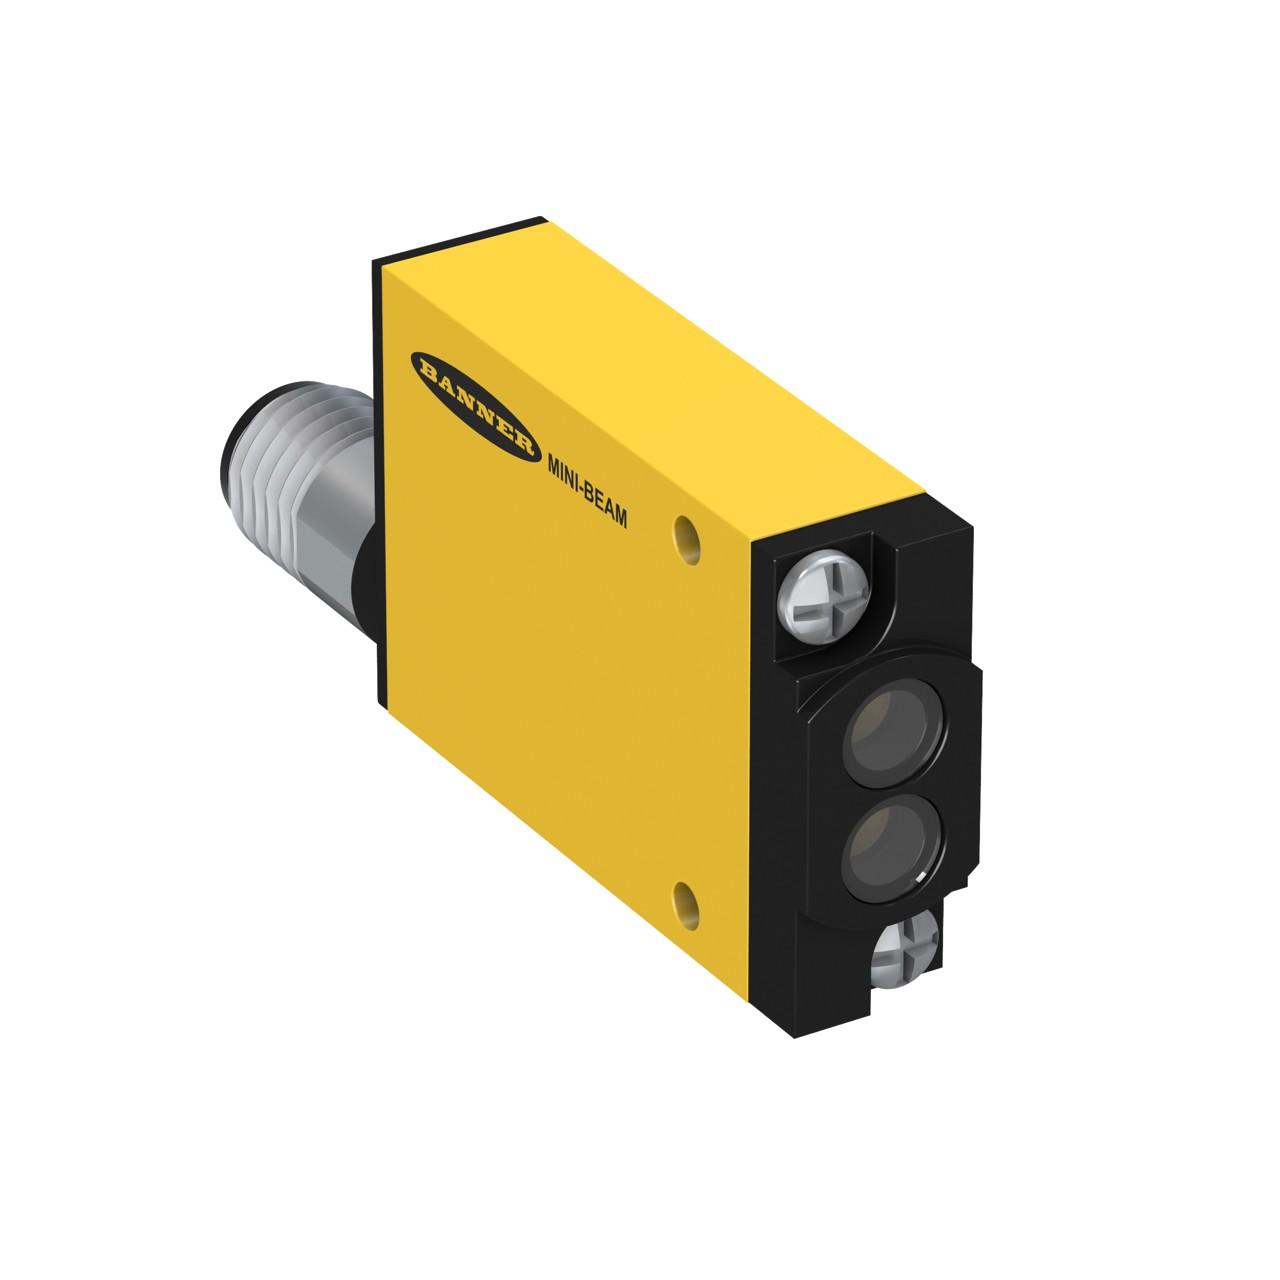 Banner SM2A312WQD Photo-electric sensor with divergent diffuse system - Banner Engineering (MINI-BEAM series - SM2A312) - Part #26893 - Sensing range 130mm - Infrared (IR) light (880nm) - 1 x digital output (Solid-state AC output; SPST contact type) (Light-ON or Dark-ON op